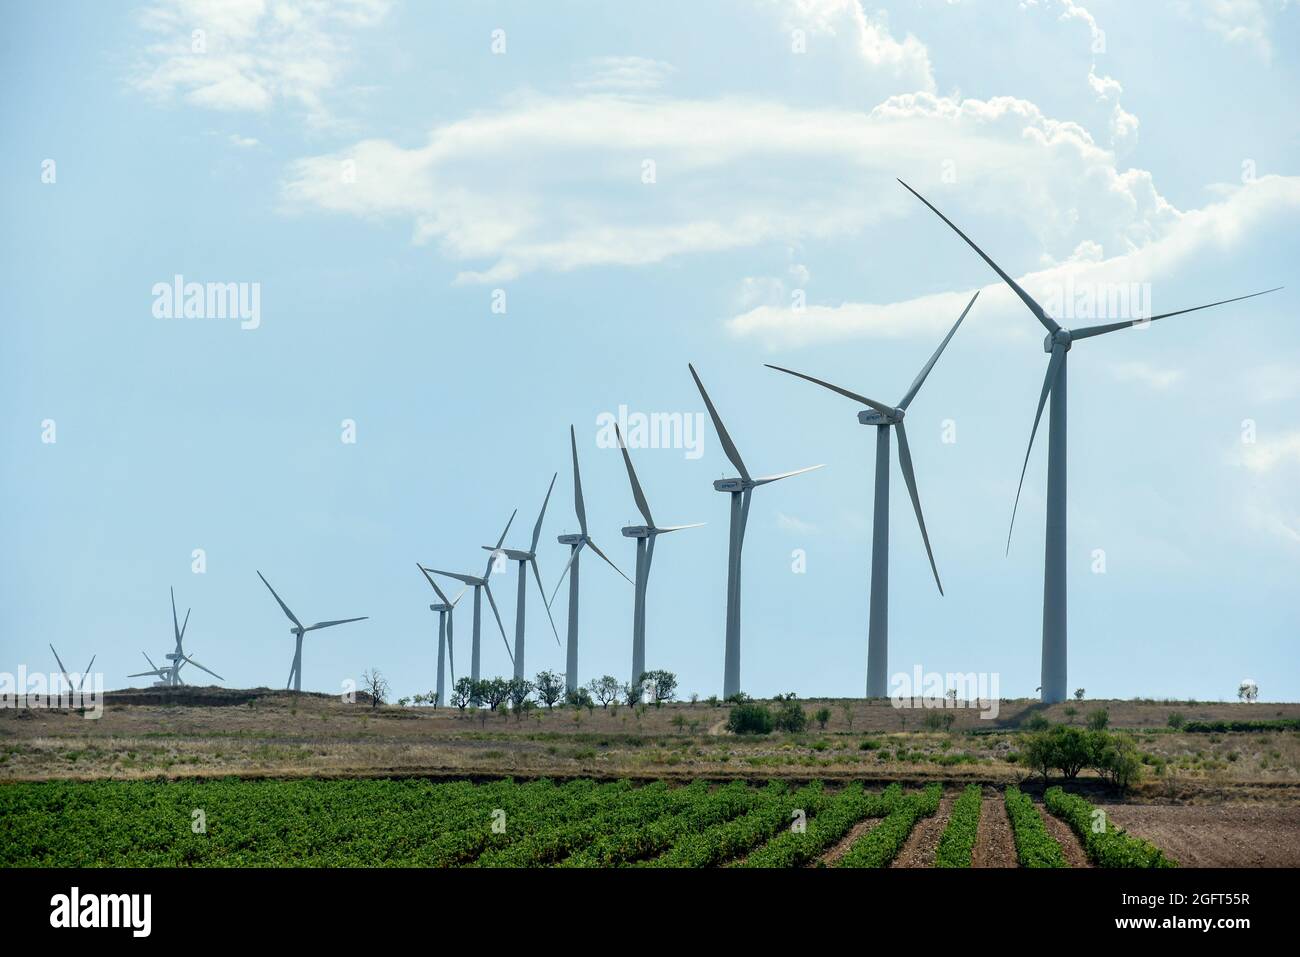 A view of wind turbines at the Wind Energy Plant Raposeras in Pradejón.The Raposeras Wind energy plant of the company EAER (Energias Alternativas Eolicas Riojanas) in the town of Pradejon has 26 wind turbines with a unit power of 1,500 kW and a blade diameter of 70.5 meters and they develop with an installed power of 39 MW. Credit: SOPA Images Limited/Alamy Live News Stock Photo